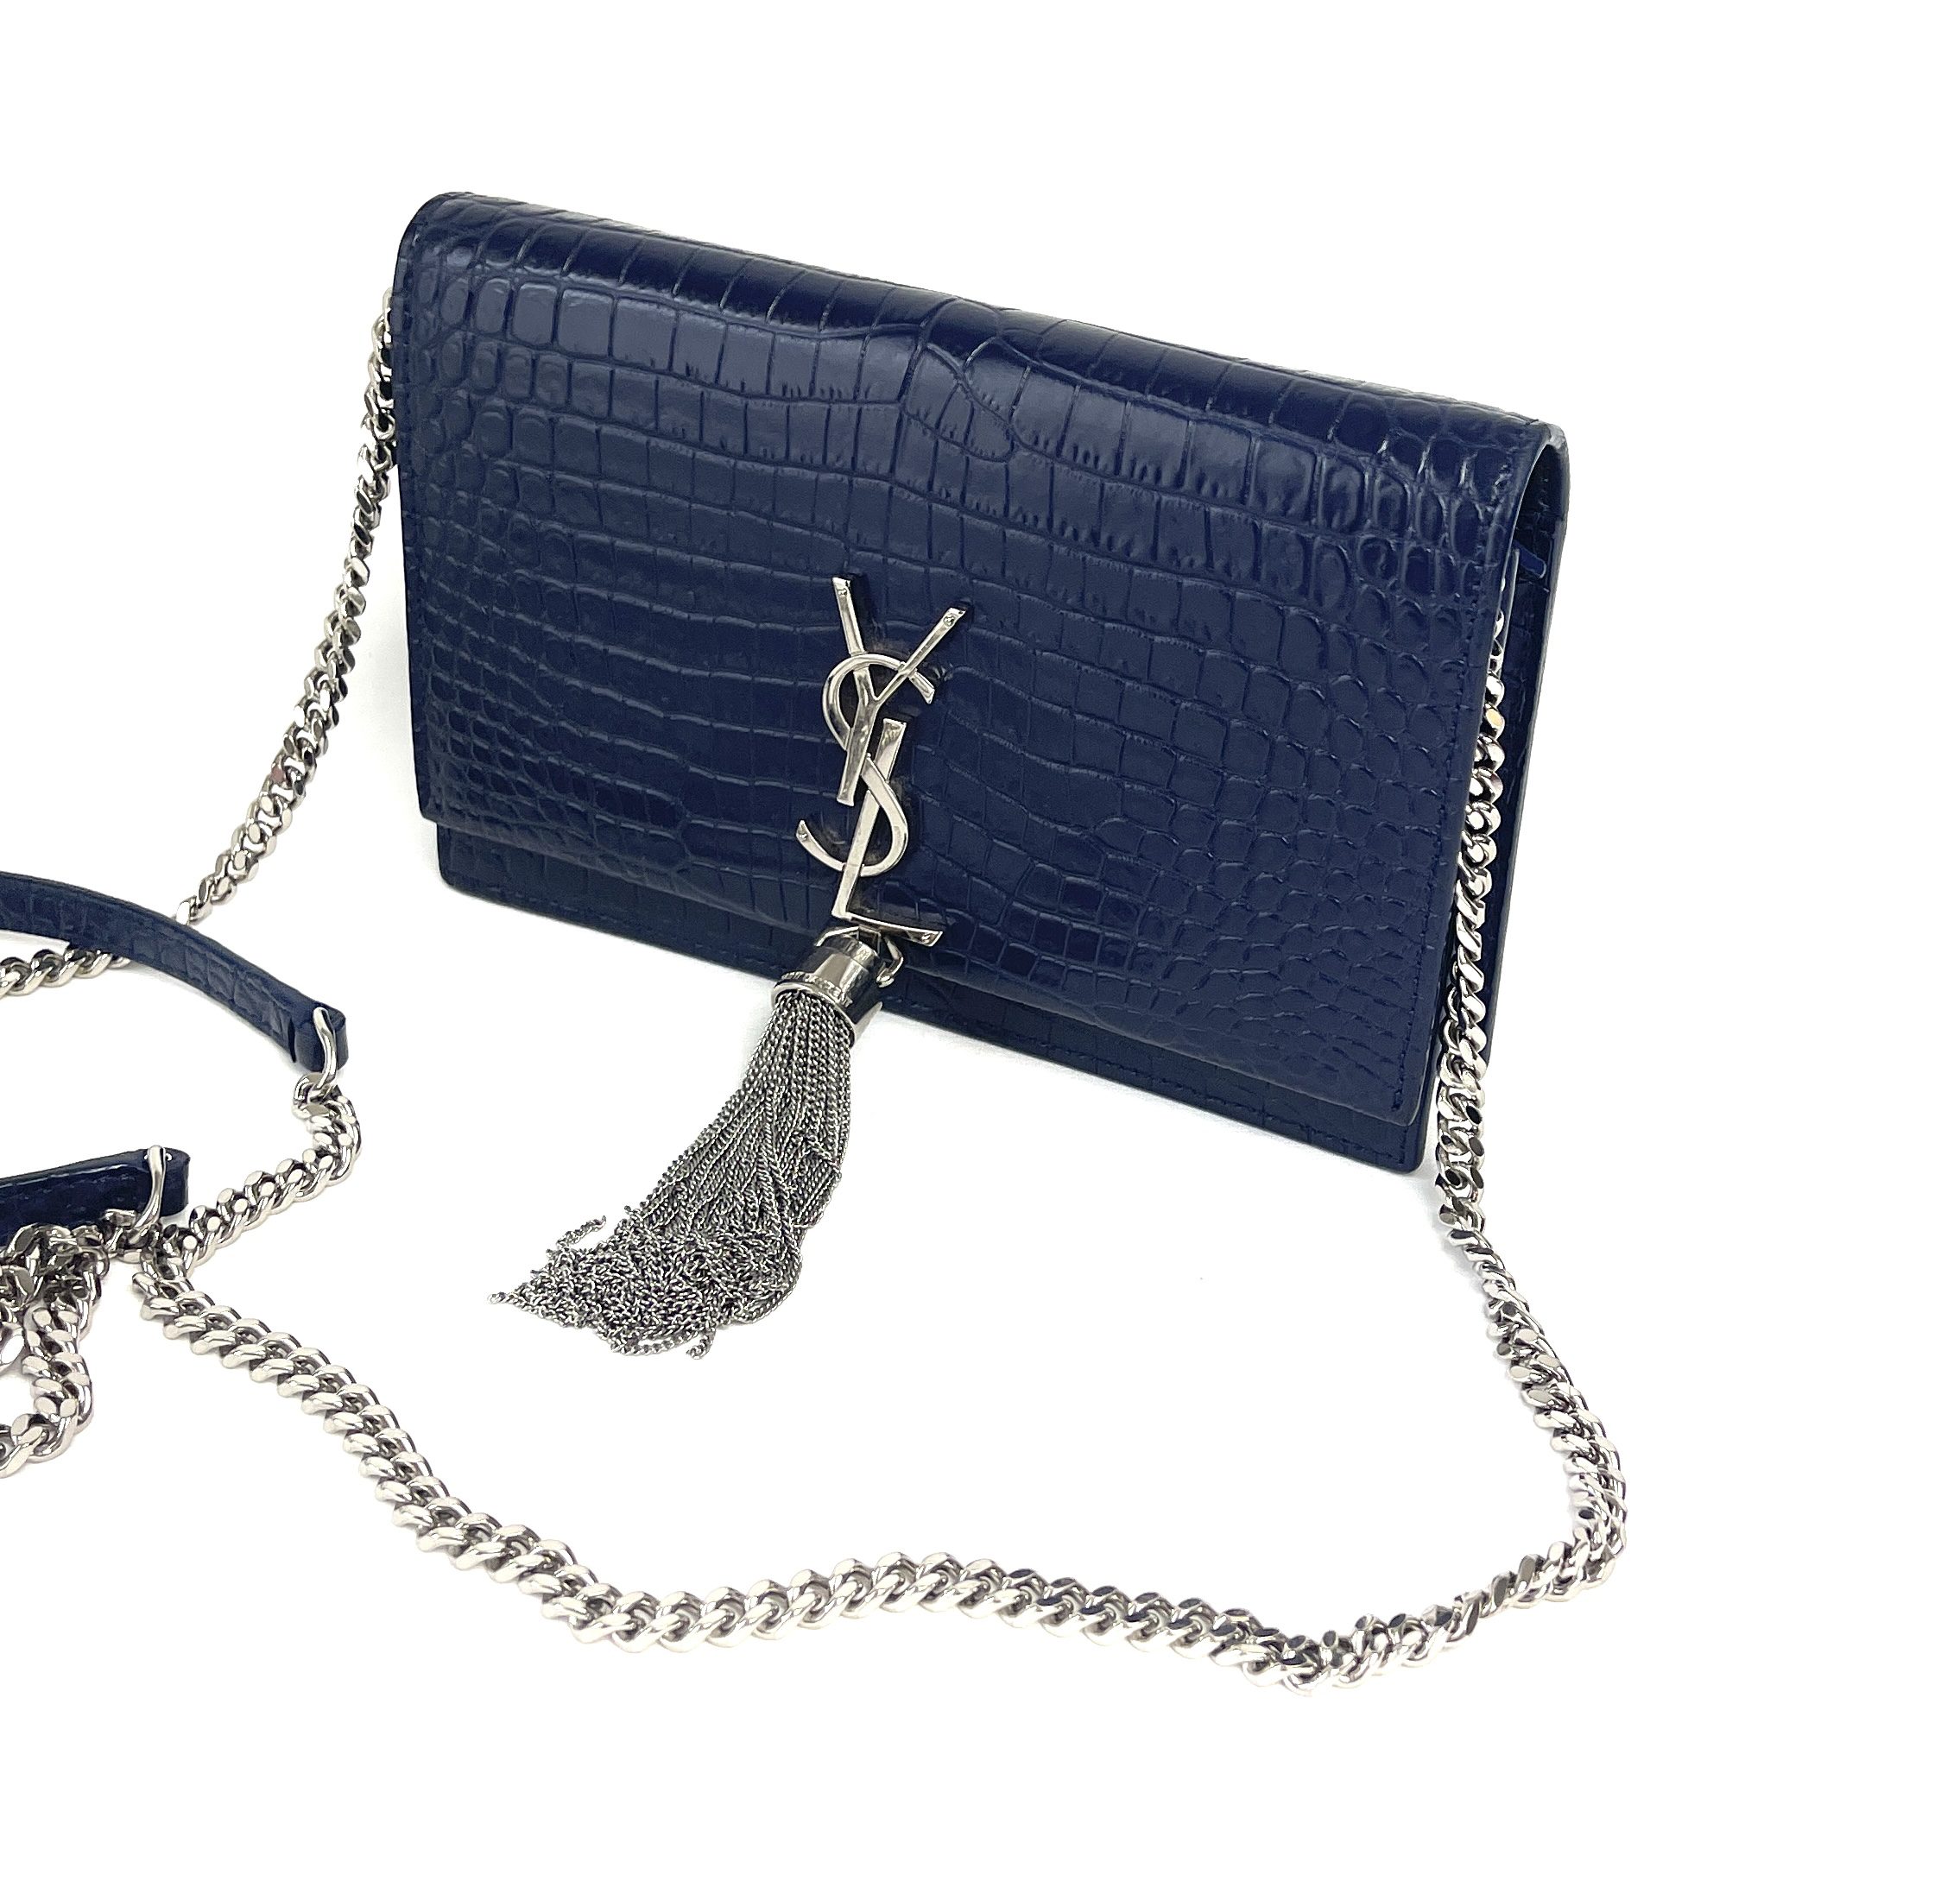 YSL Kate Navy Blue Croc Embossed Leather WOC Chain Bag with Tassel